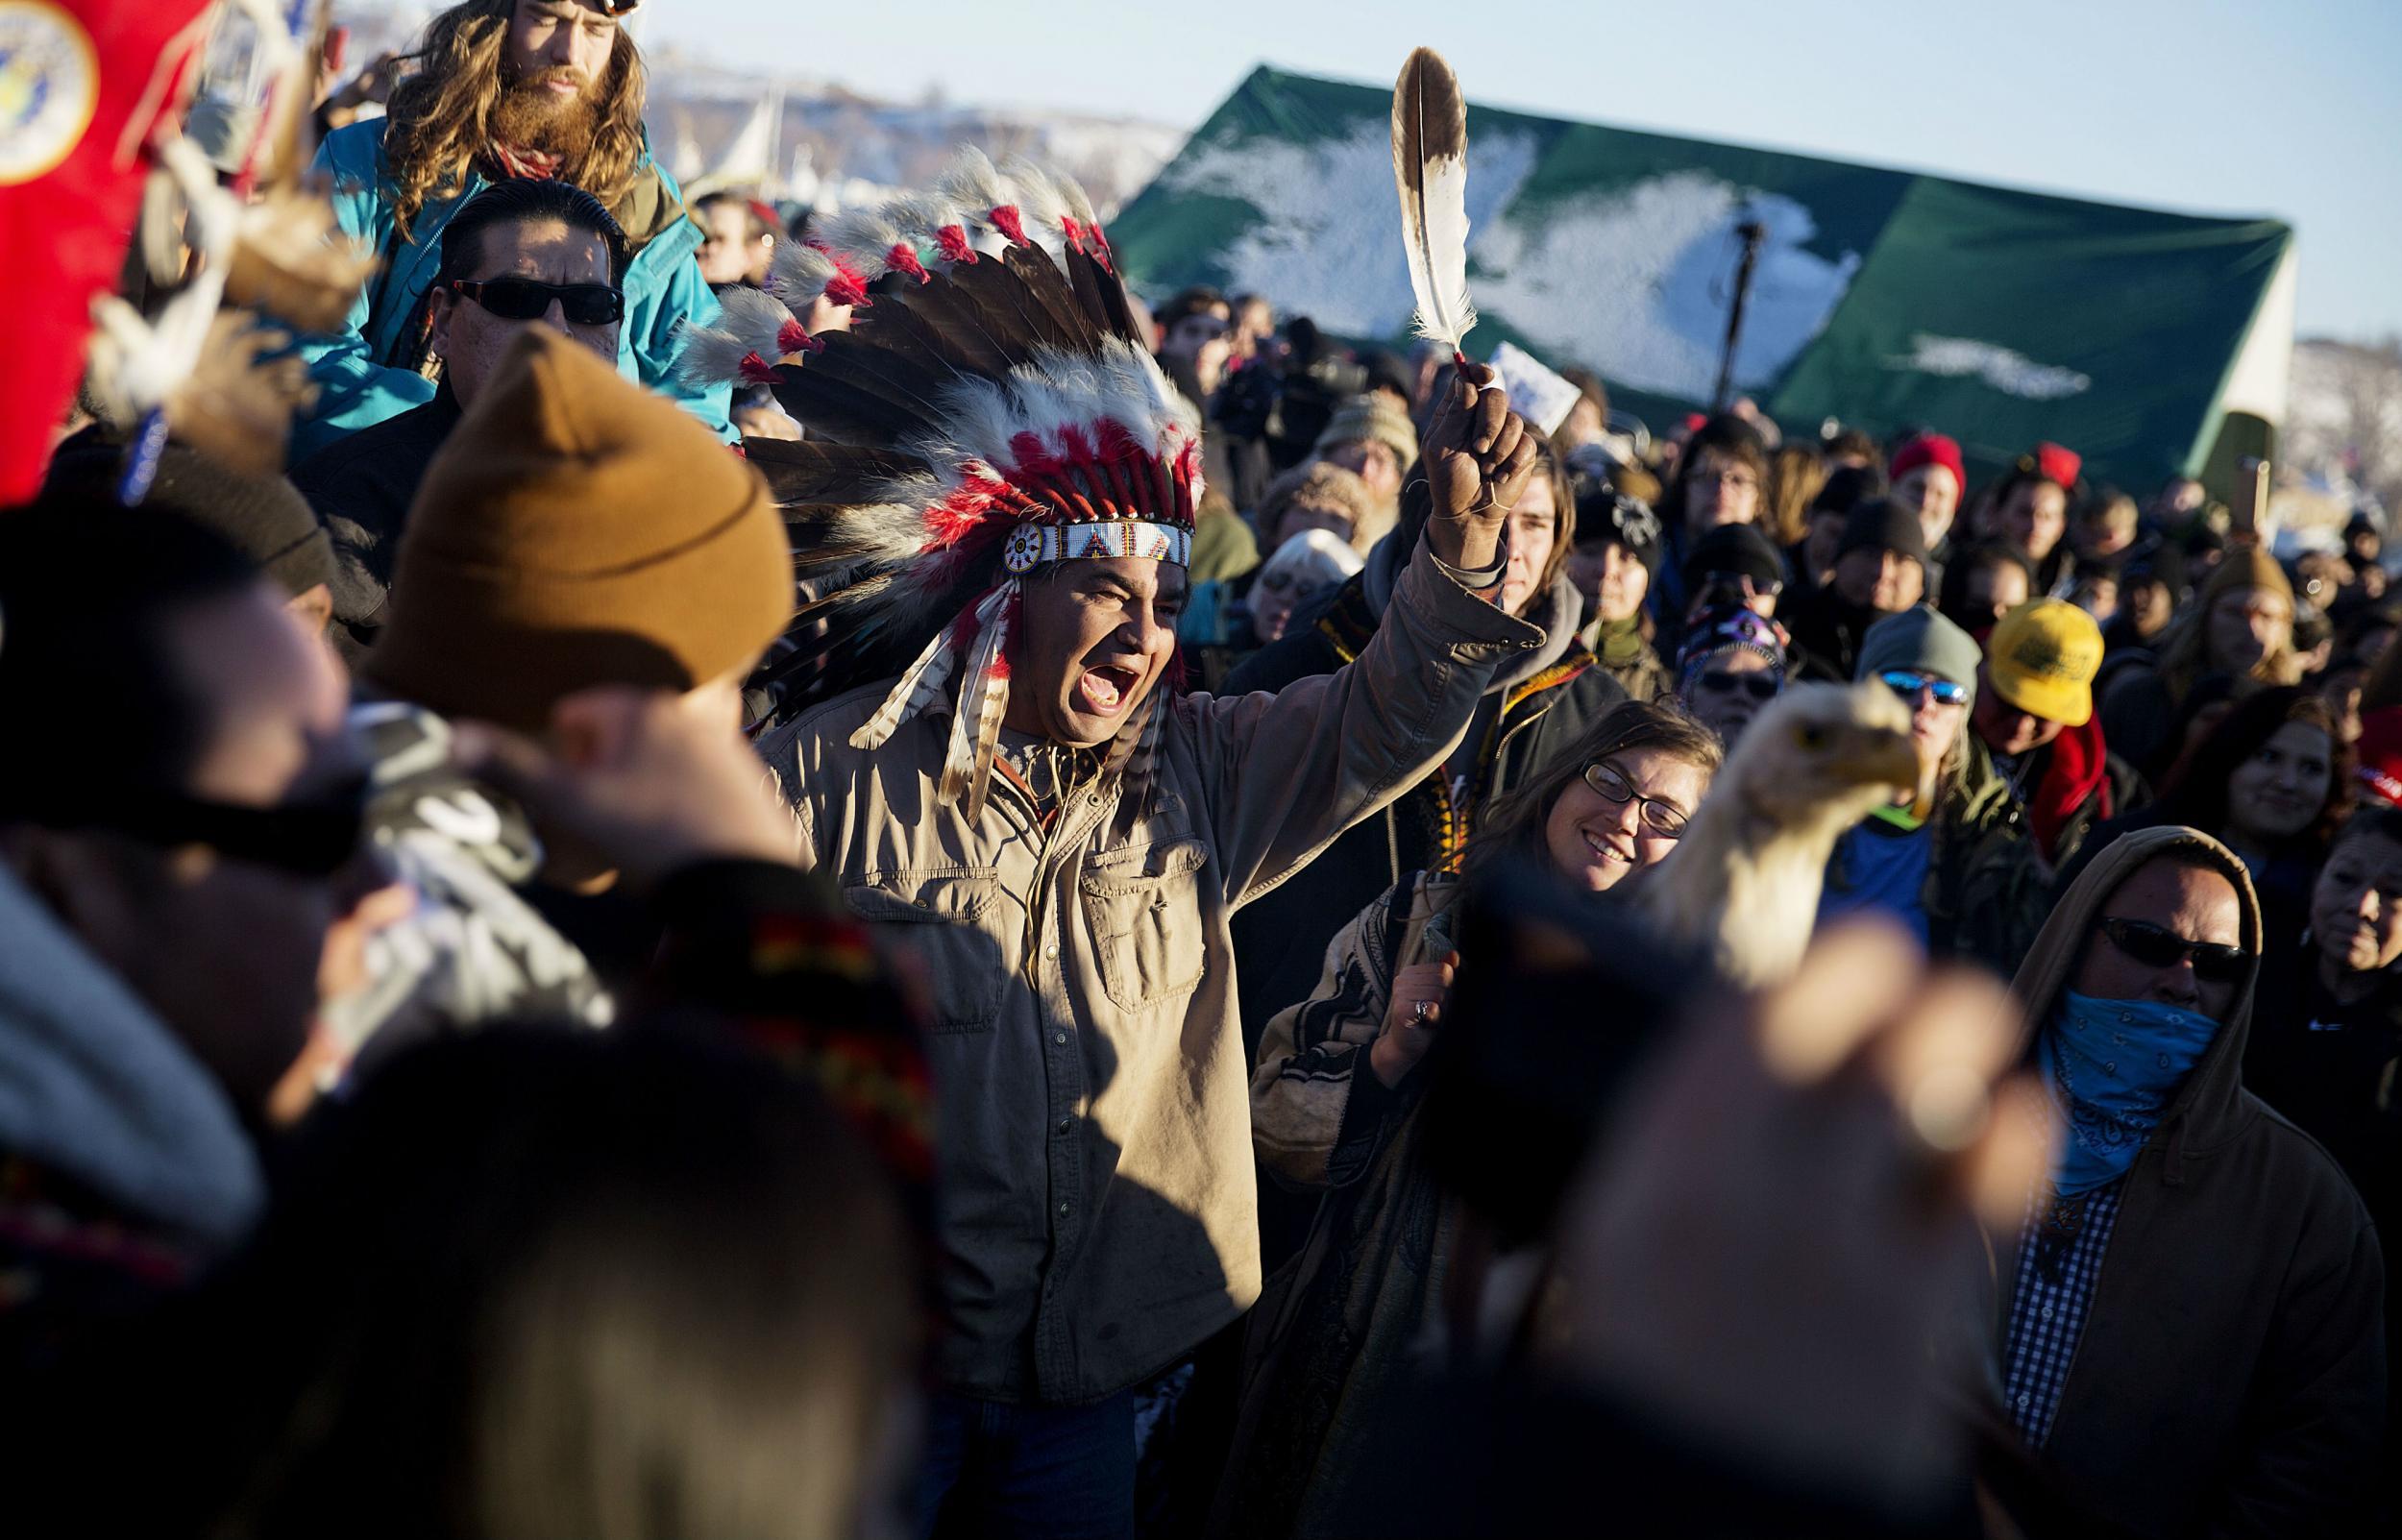 Activists celebrated at the Oceti Sakowin camp after it was announced that that permission had been denied